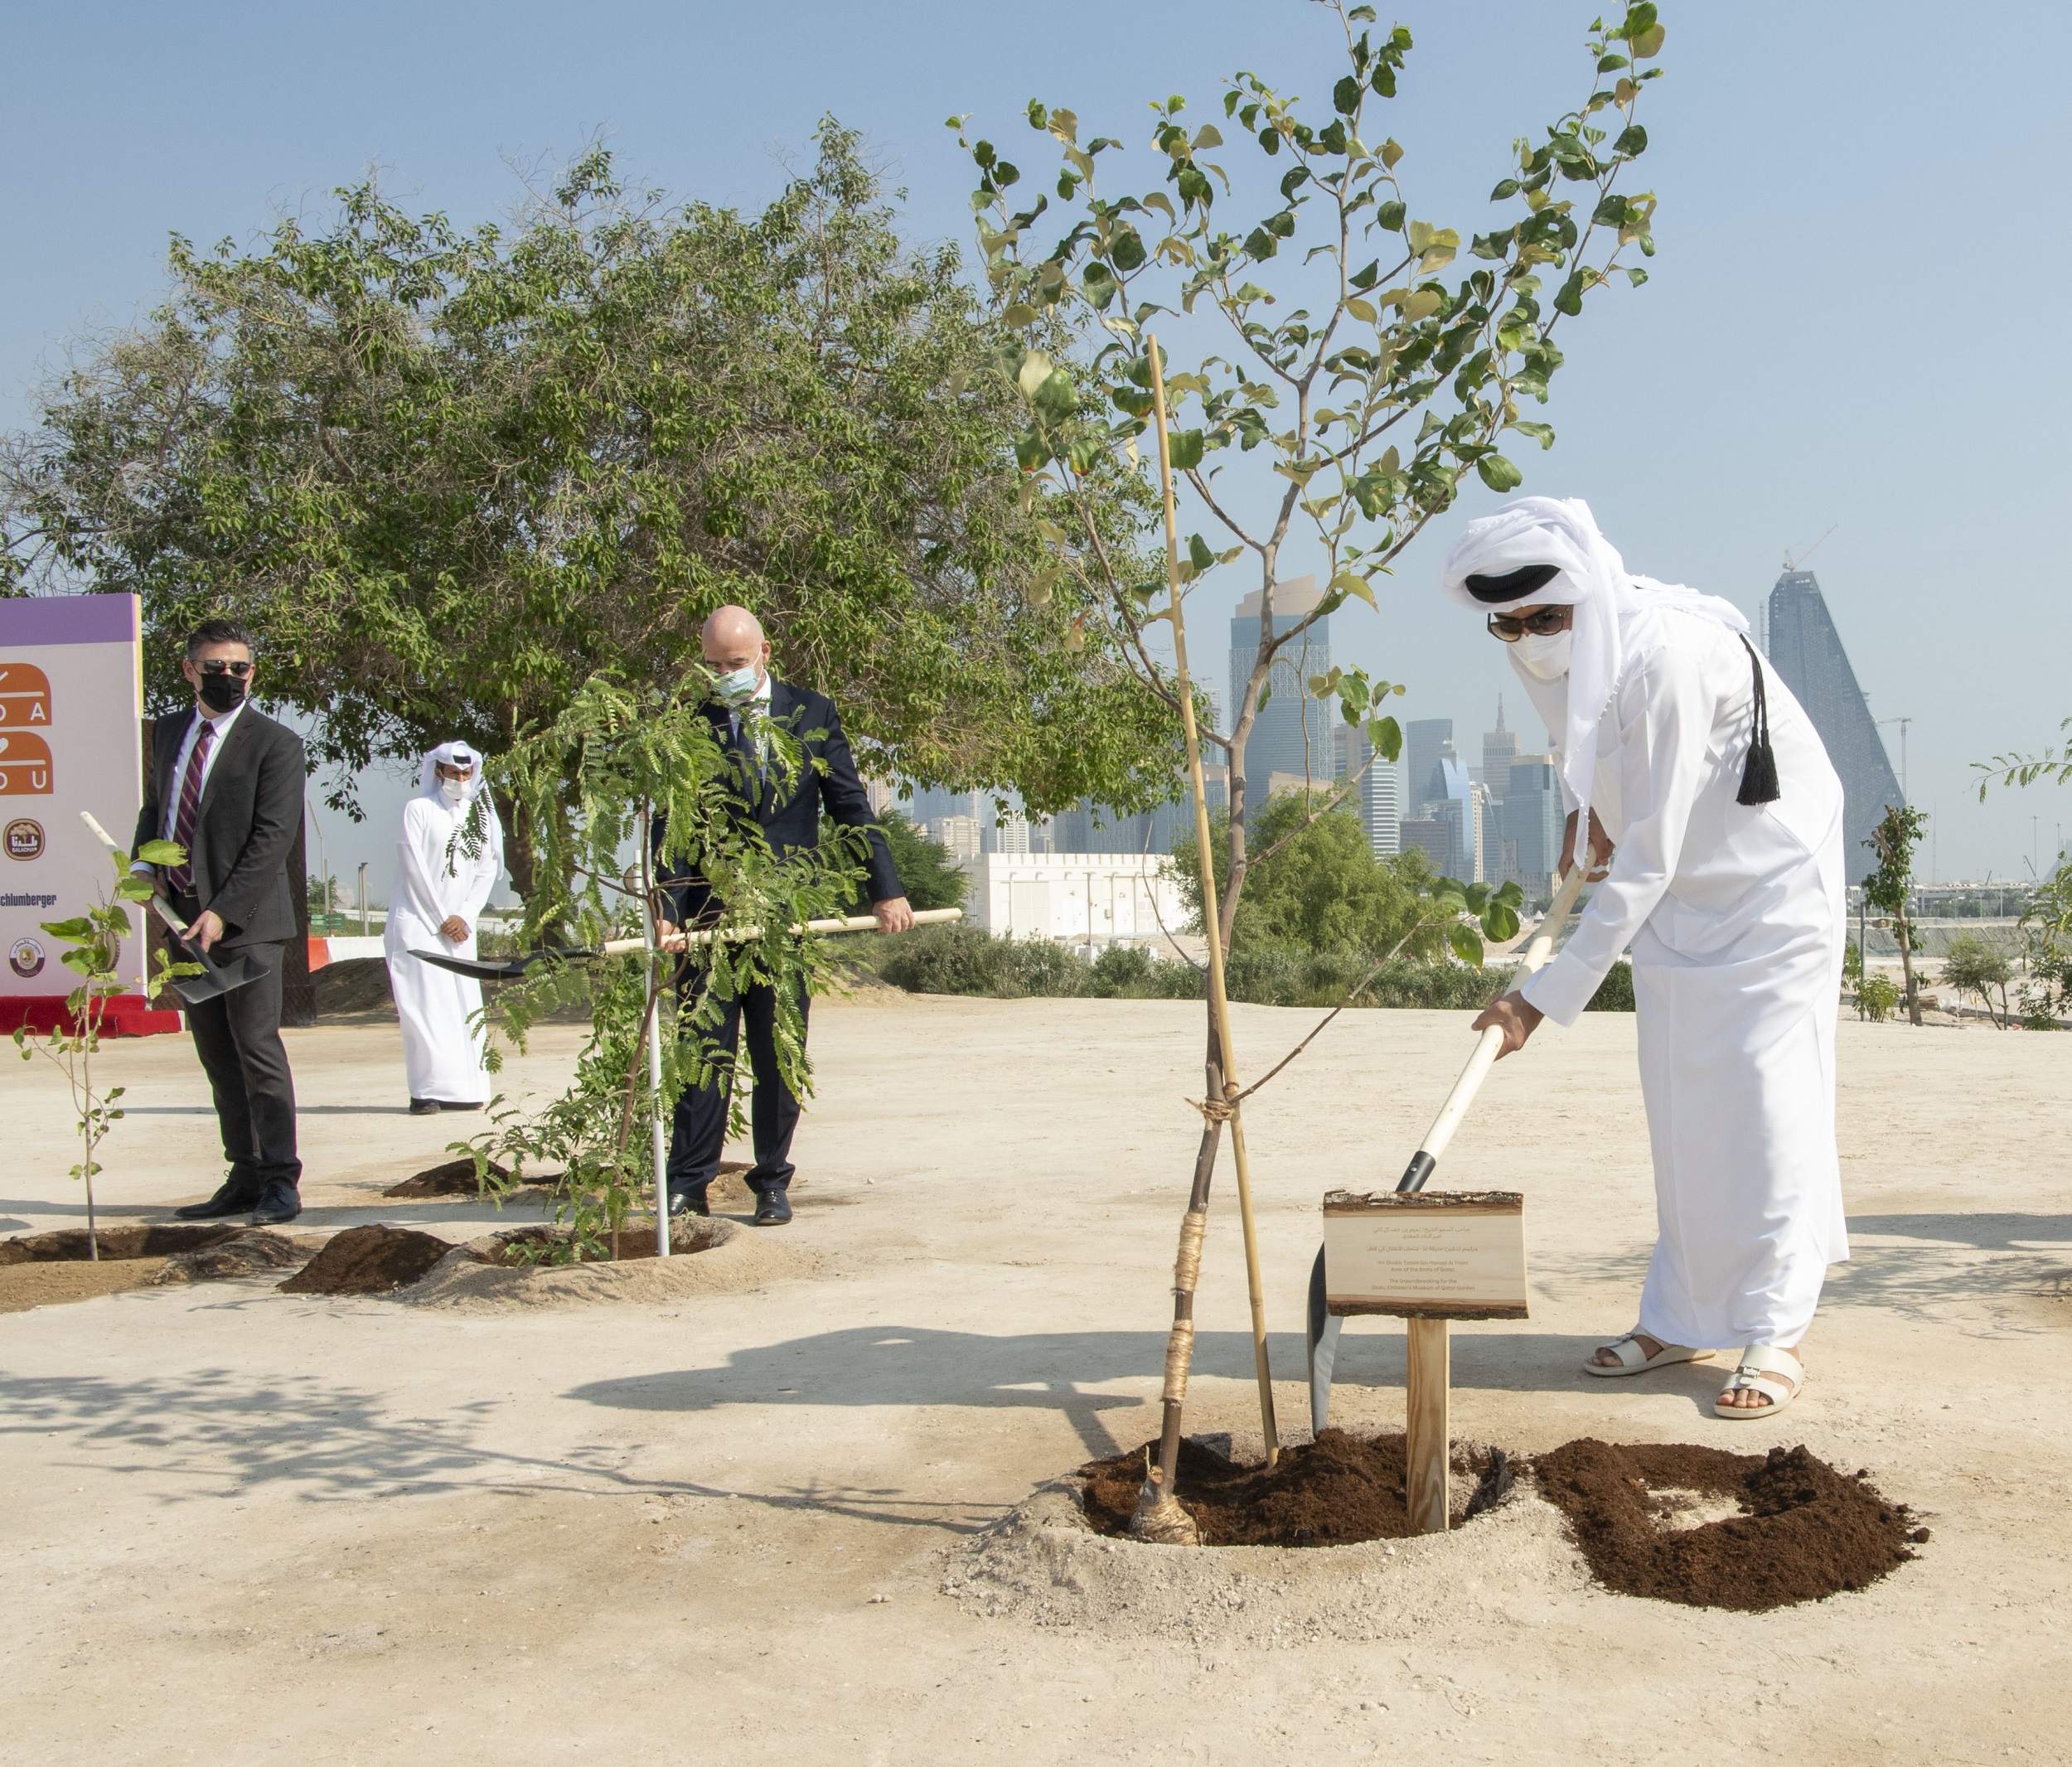 Amir plants Sidra tree to mark inauguration of Children's Museum garden project